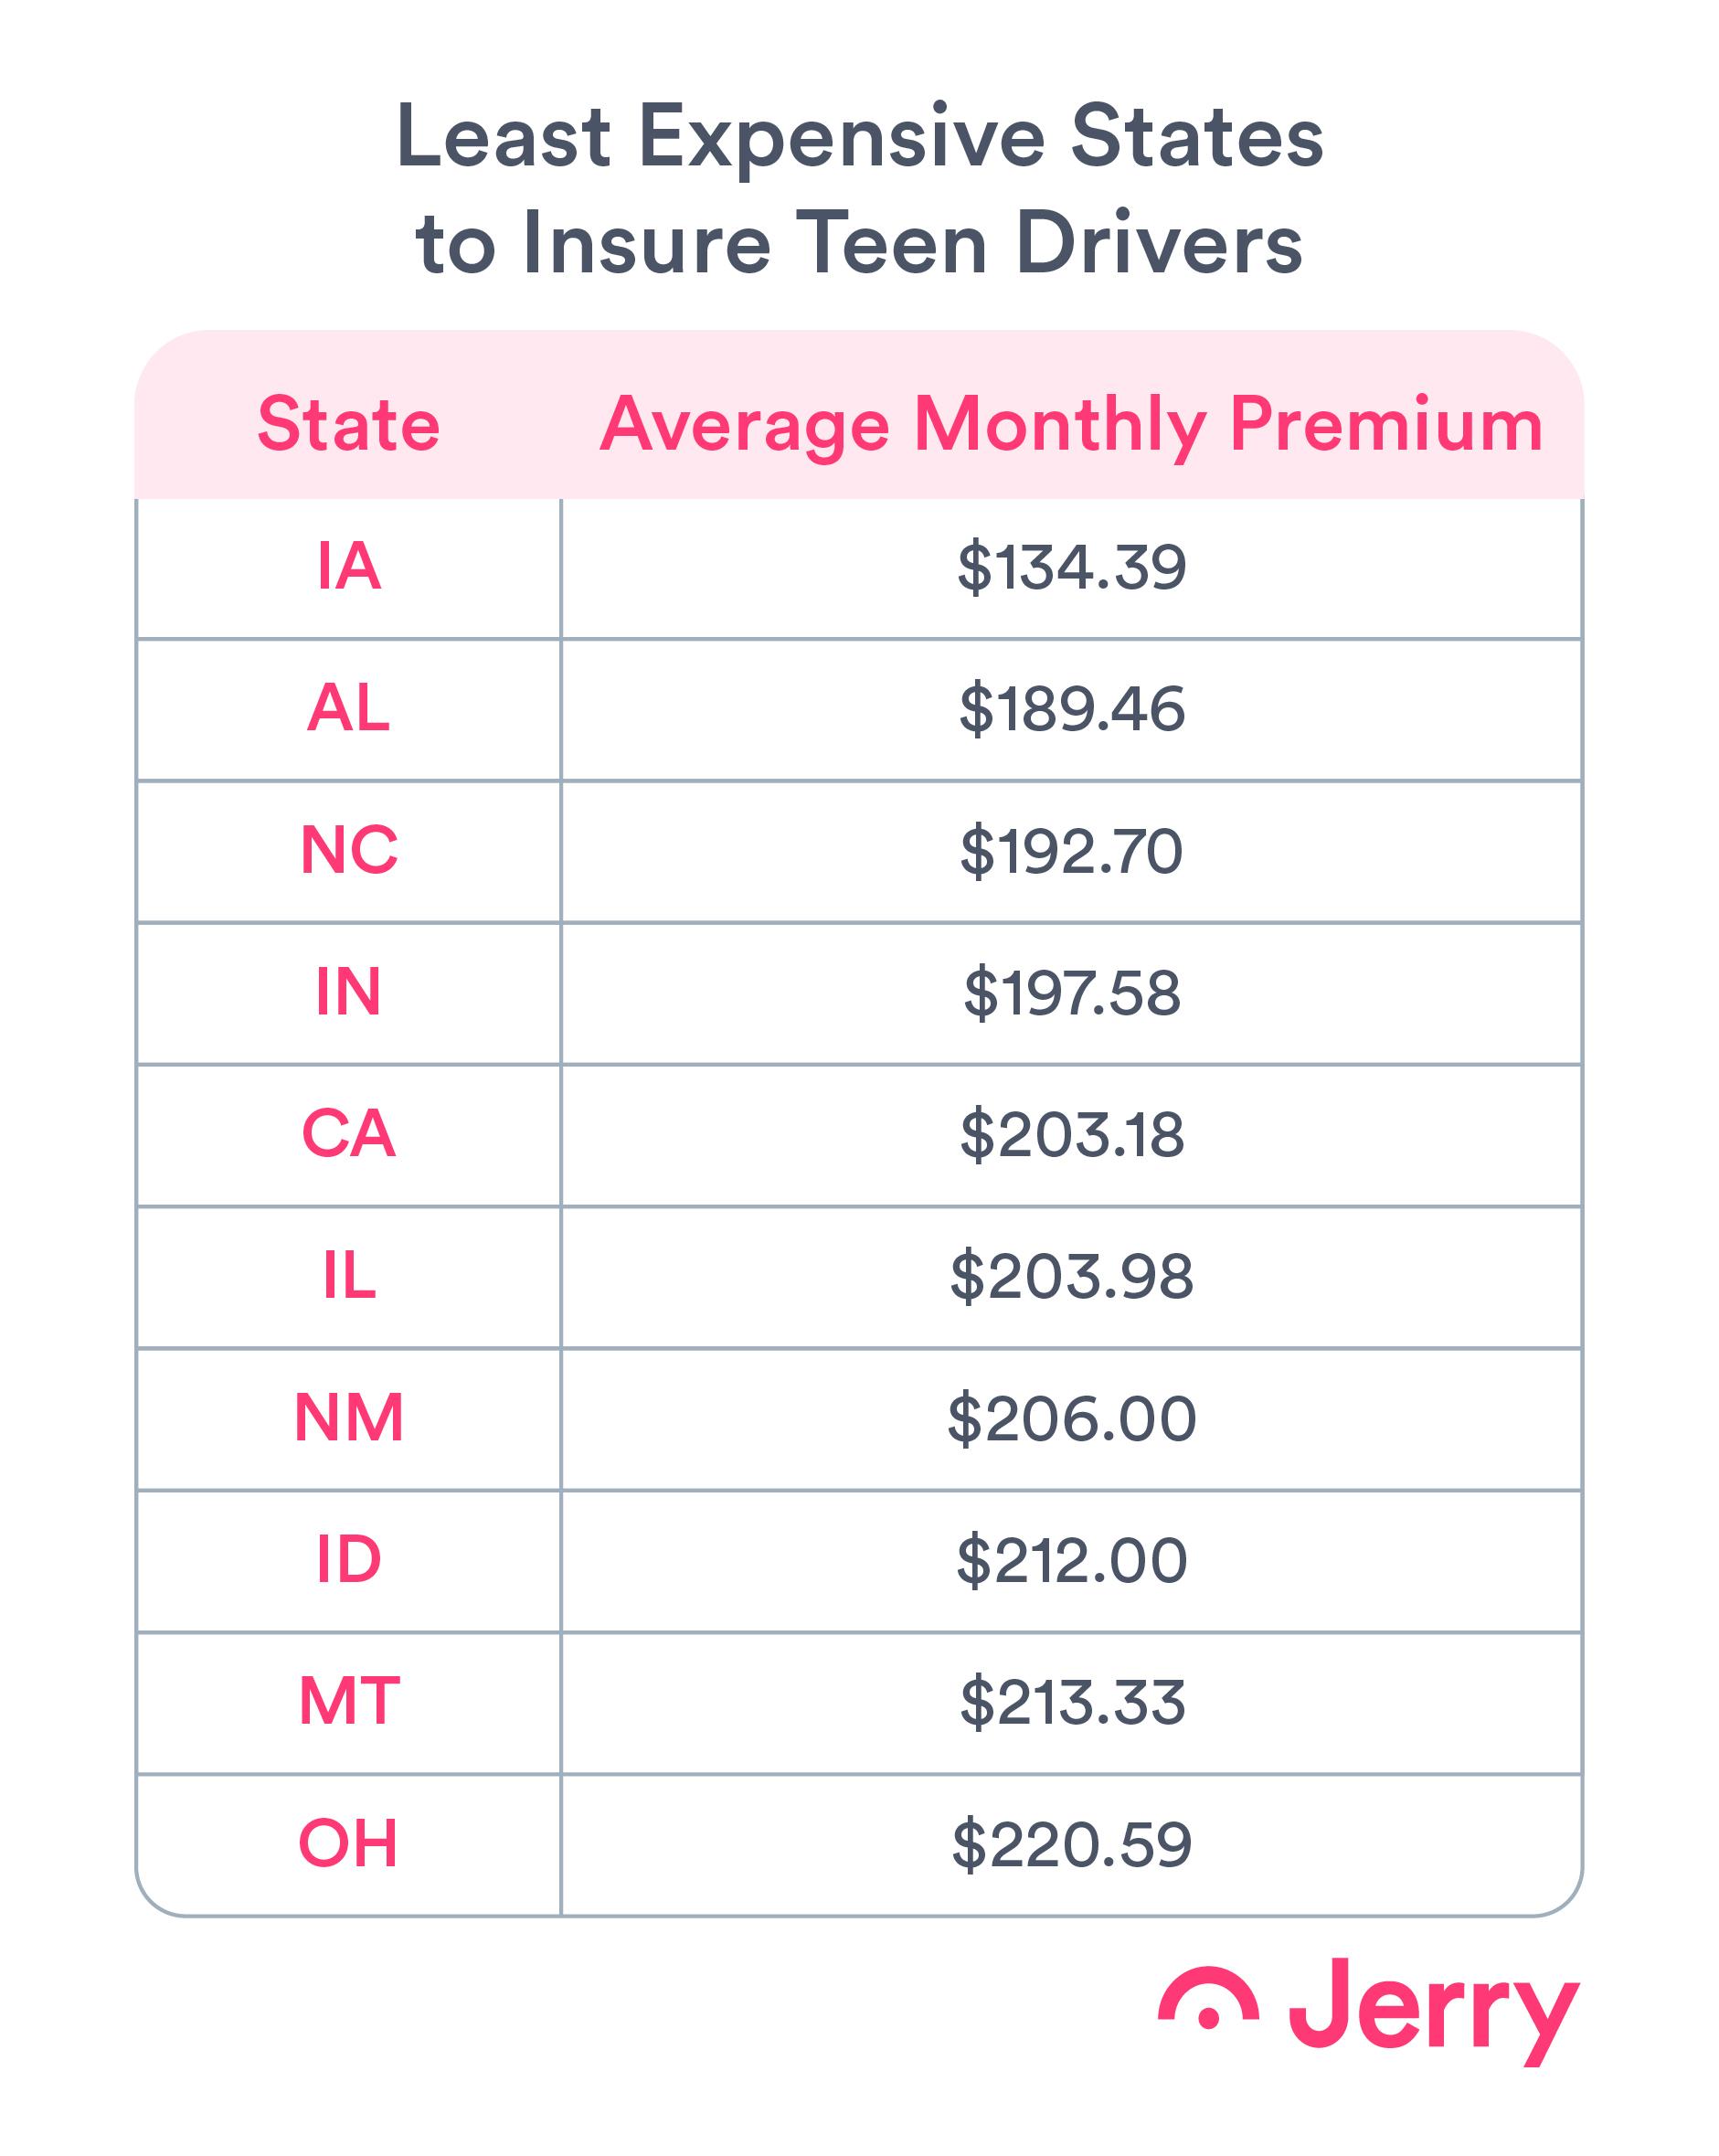 A table showing the least expensive states for teen driver car insurance